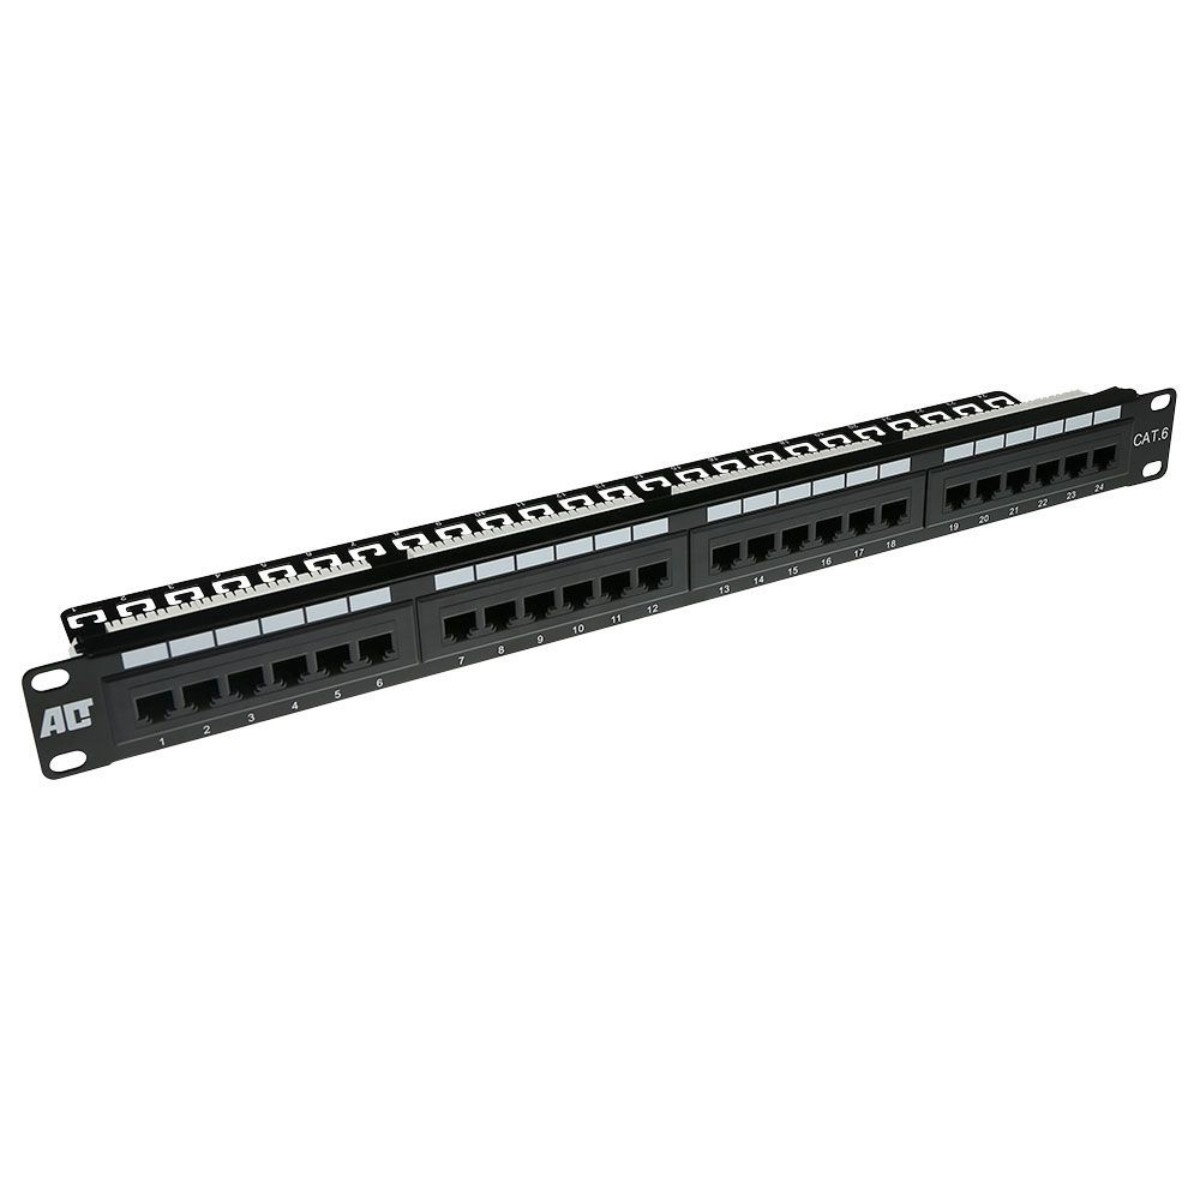 ACT PP1011 CAT6 24-Ports UTP Patchpanel